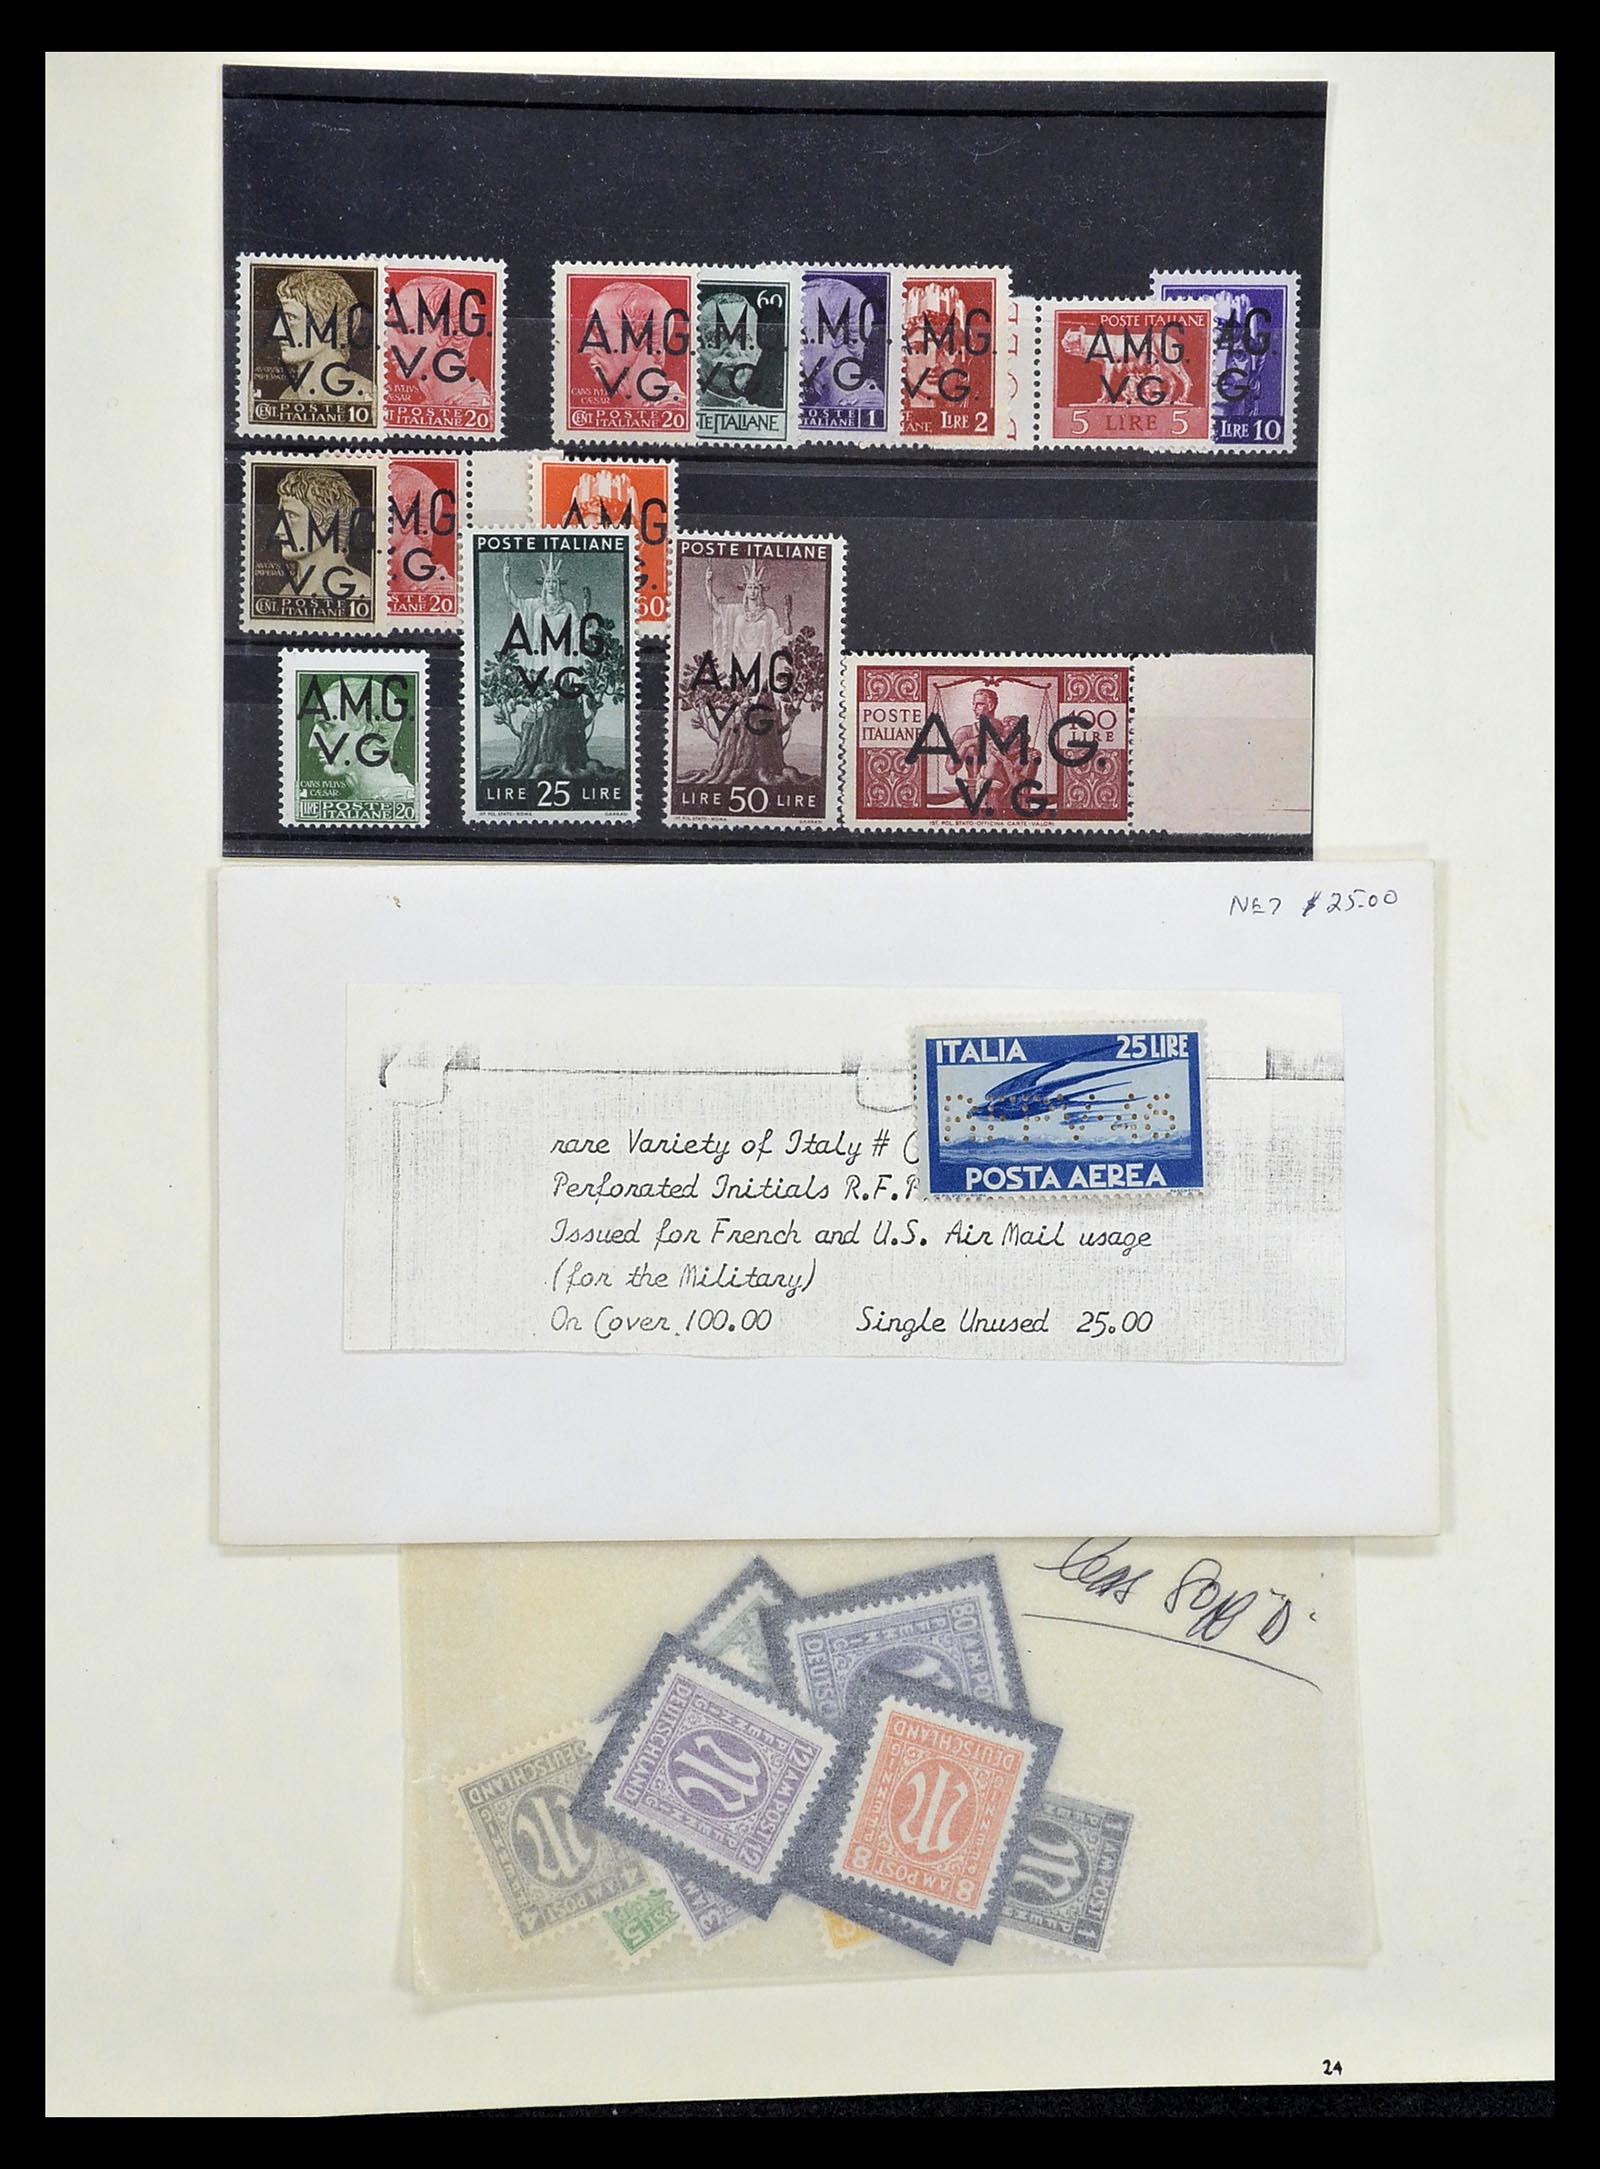 35109 163 - Stamp Collection 35109 AMG 1943-1952.